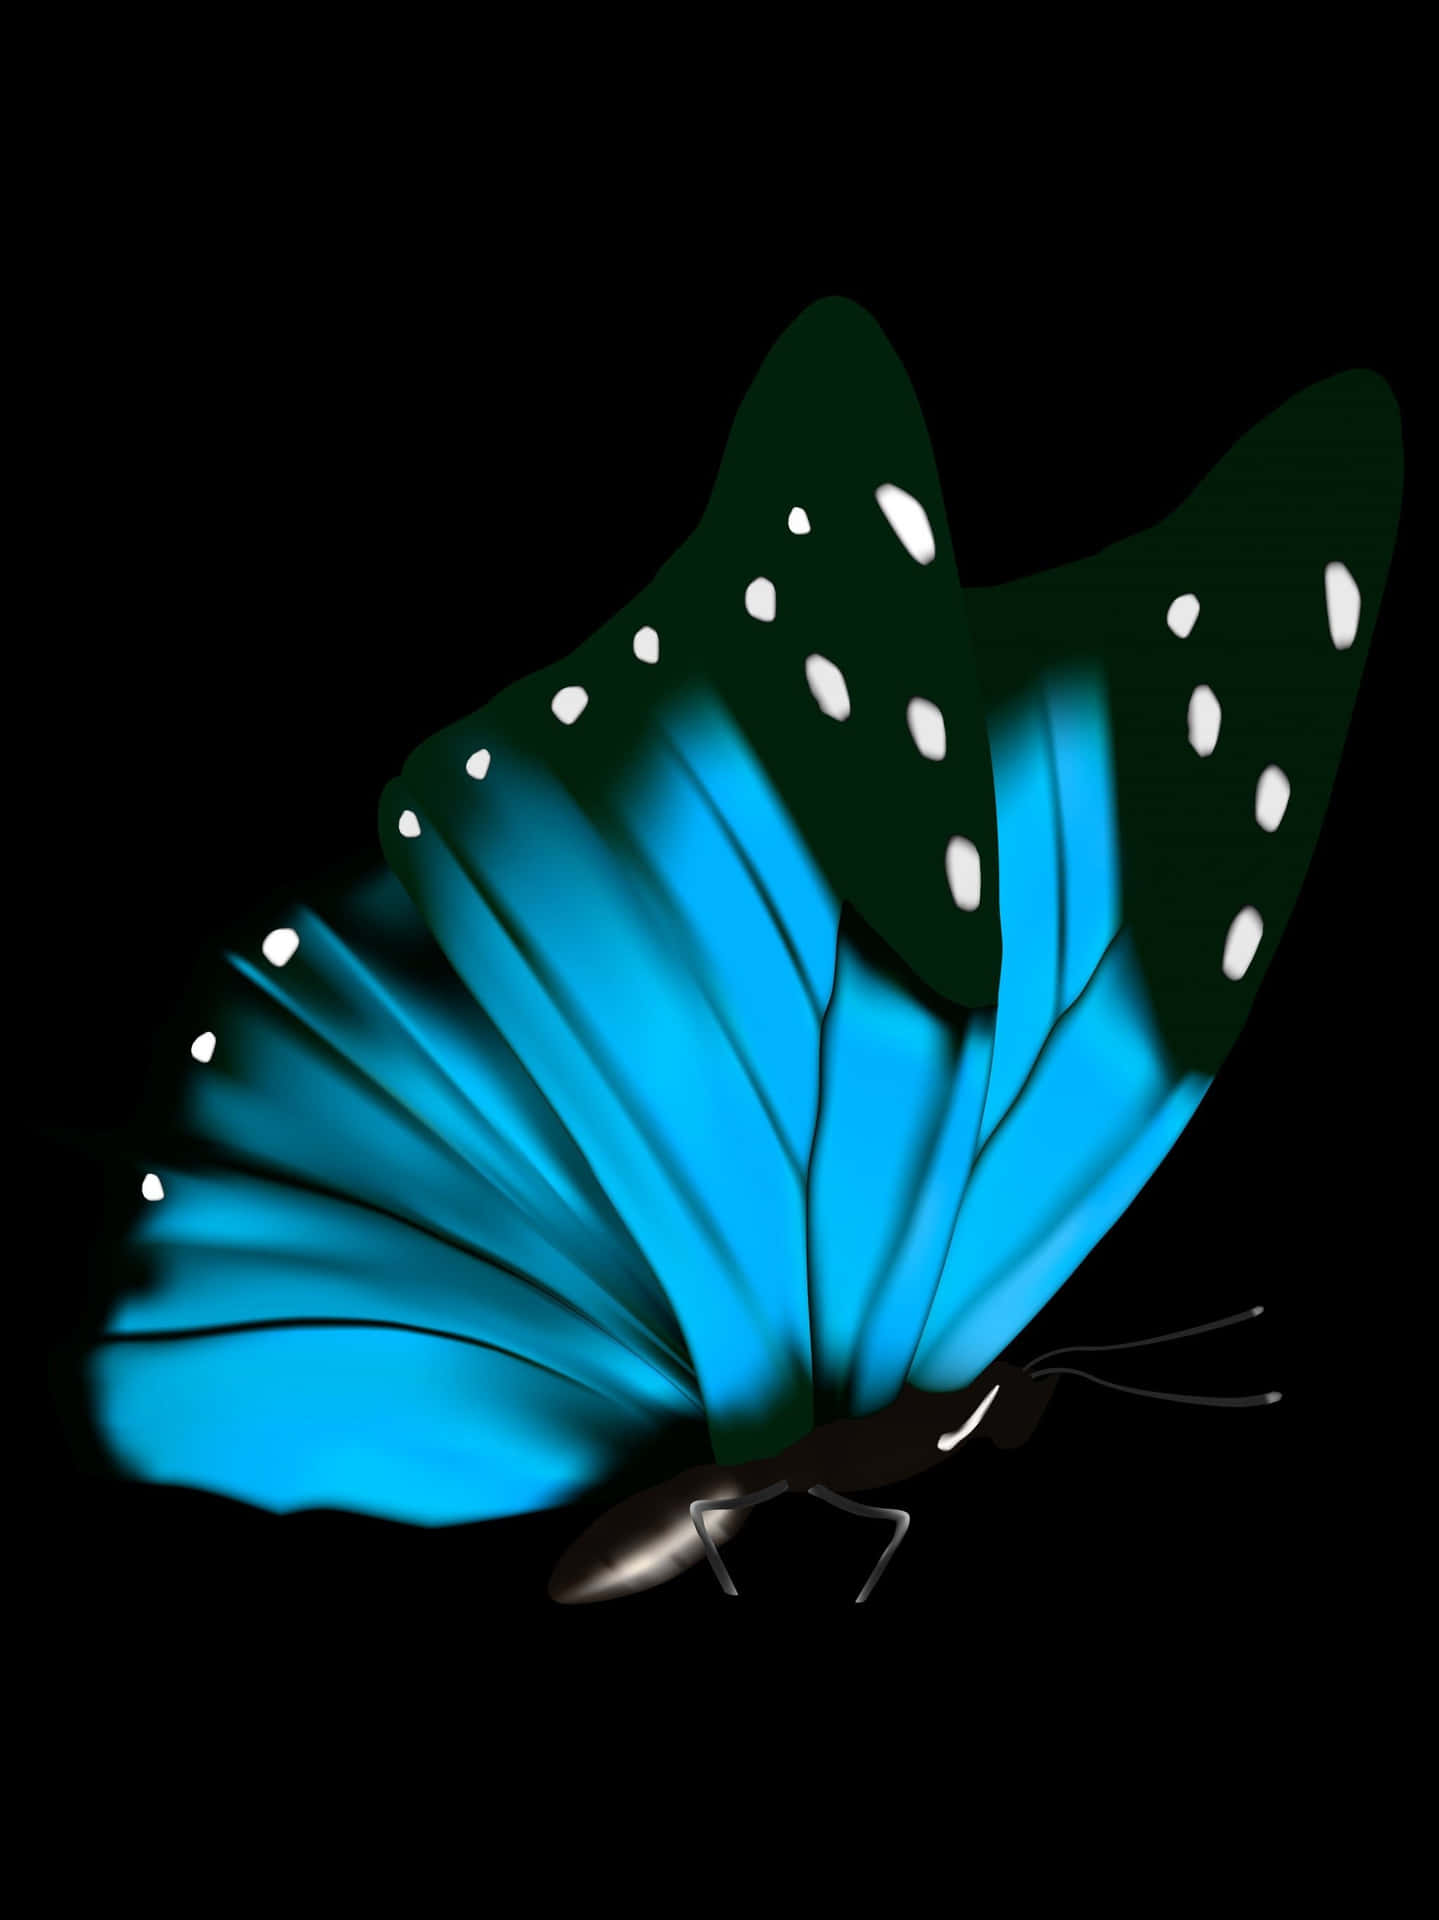 Caption: Mysterious Dark Butterfly on Abstract Background Wallpaper